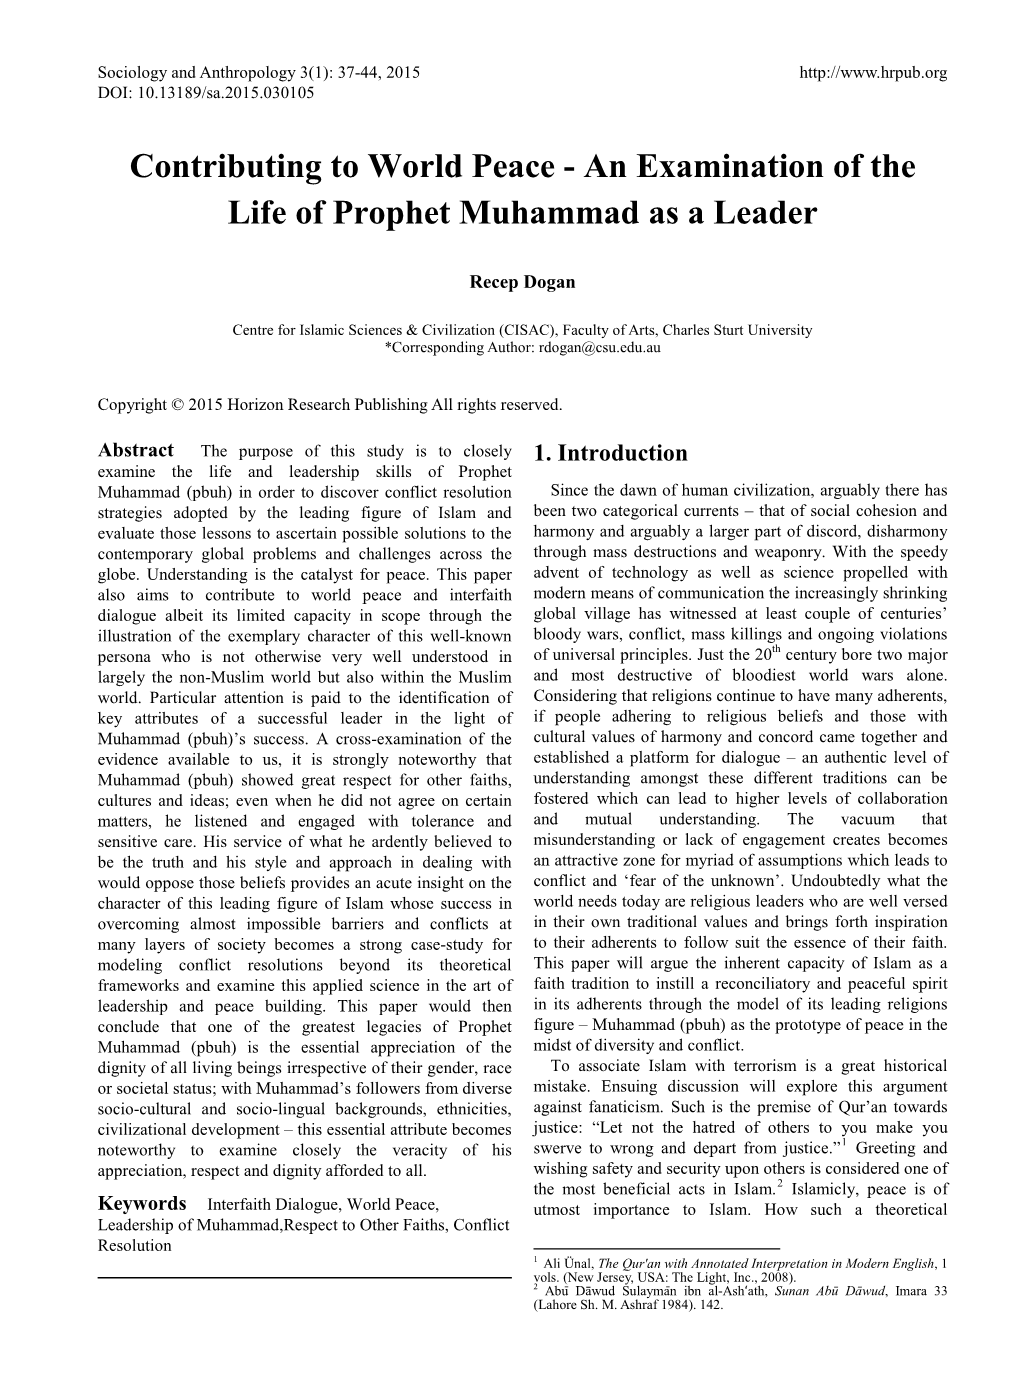 Contributing to World Peace - an Examination of the Life of Prophet Muhammad As a Leader